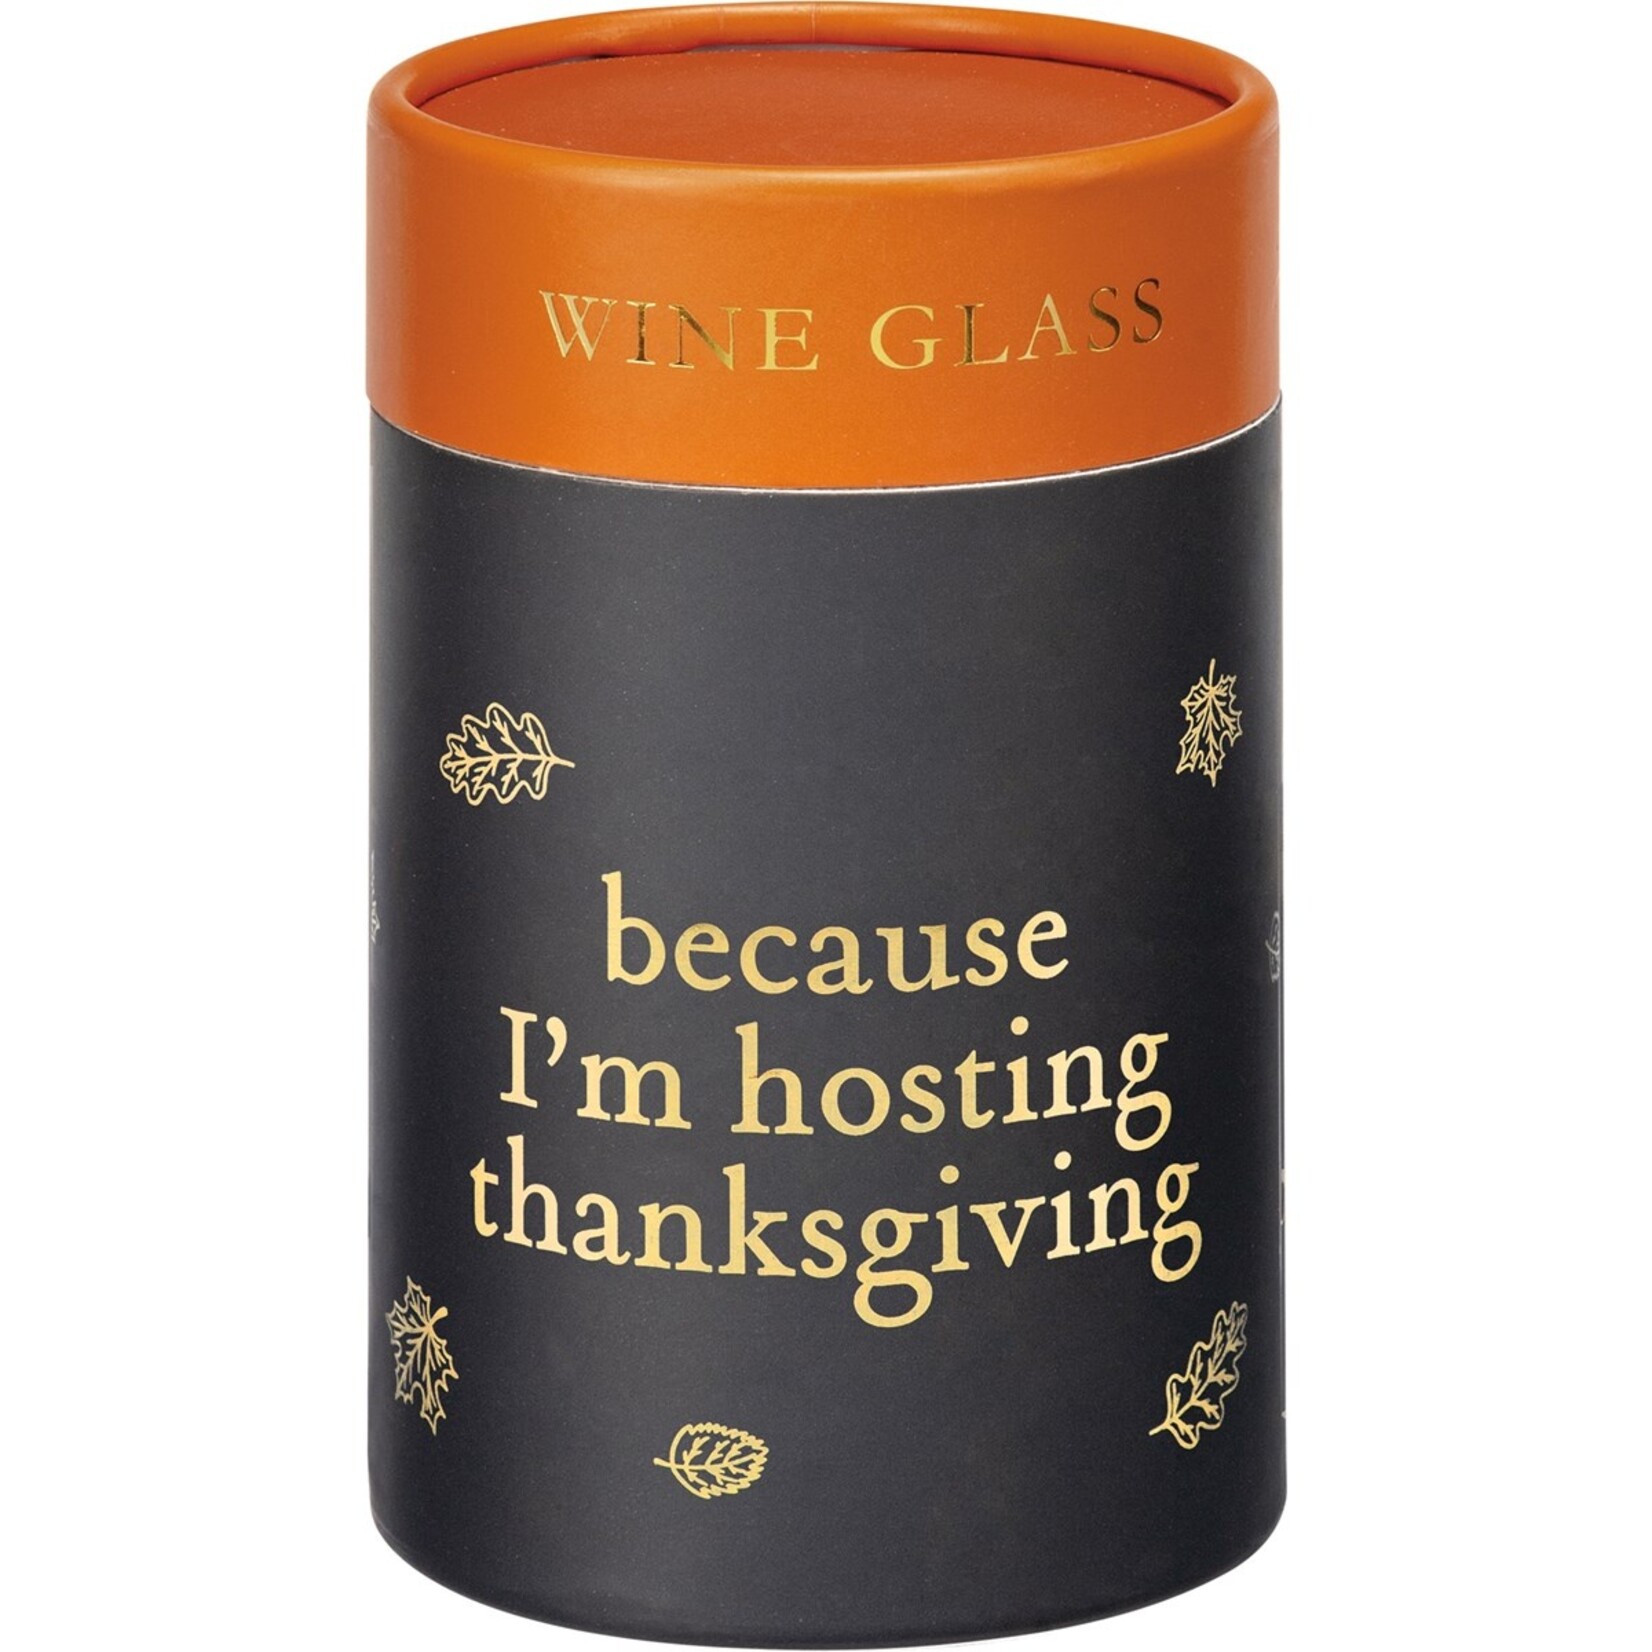 Primitives by Kathy Primitives by Kathy- I'm Hosting Thanksgiving Wine Glass